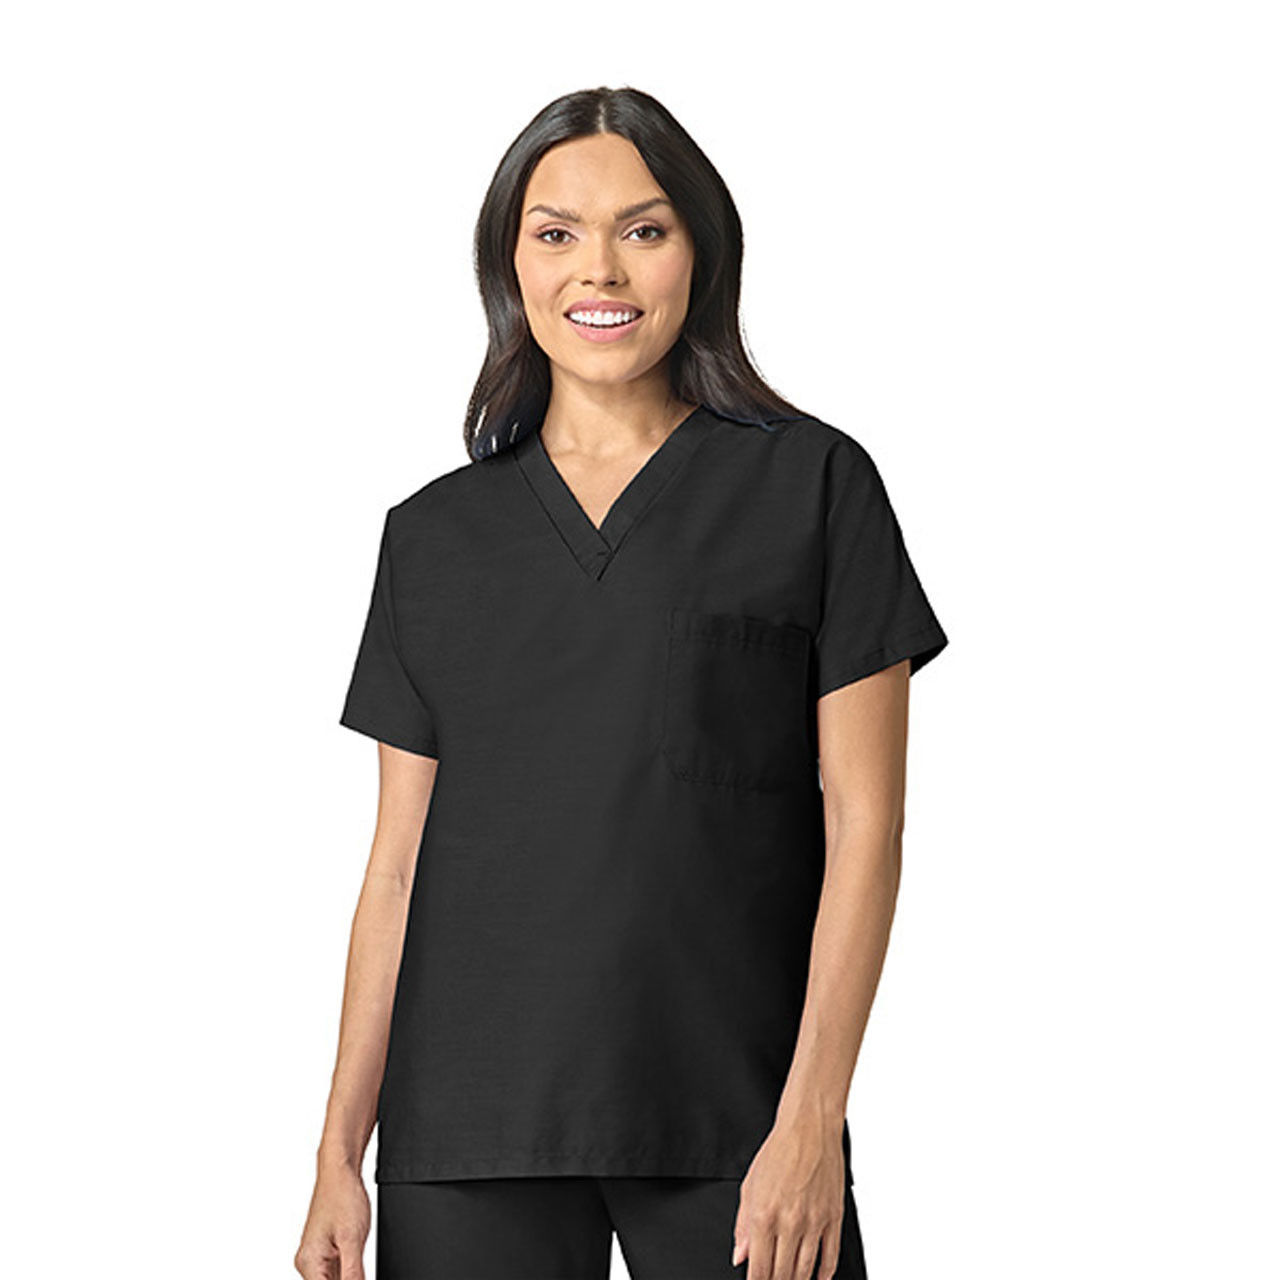 What is the gender specification for the Black Scrub Tops?